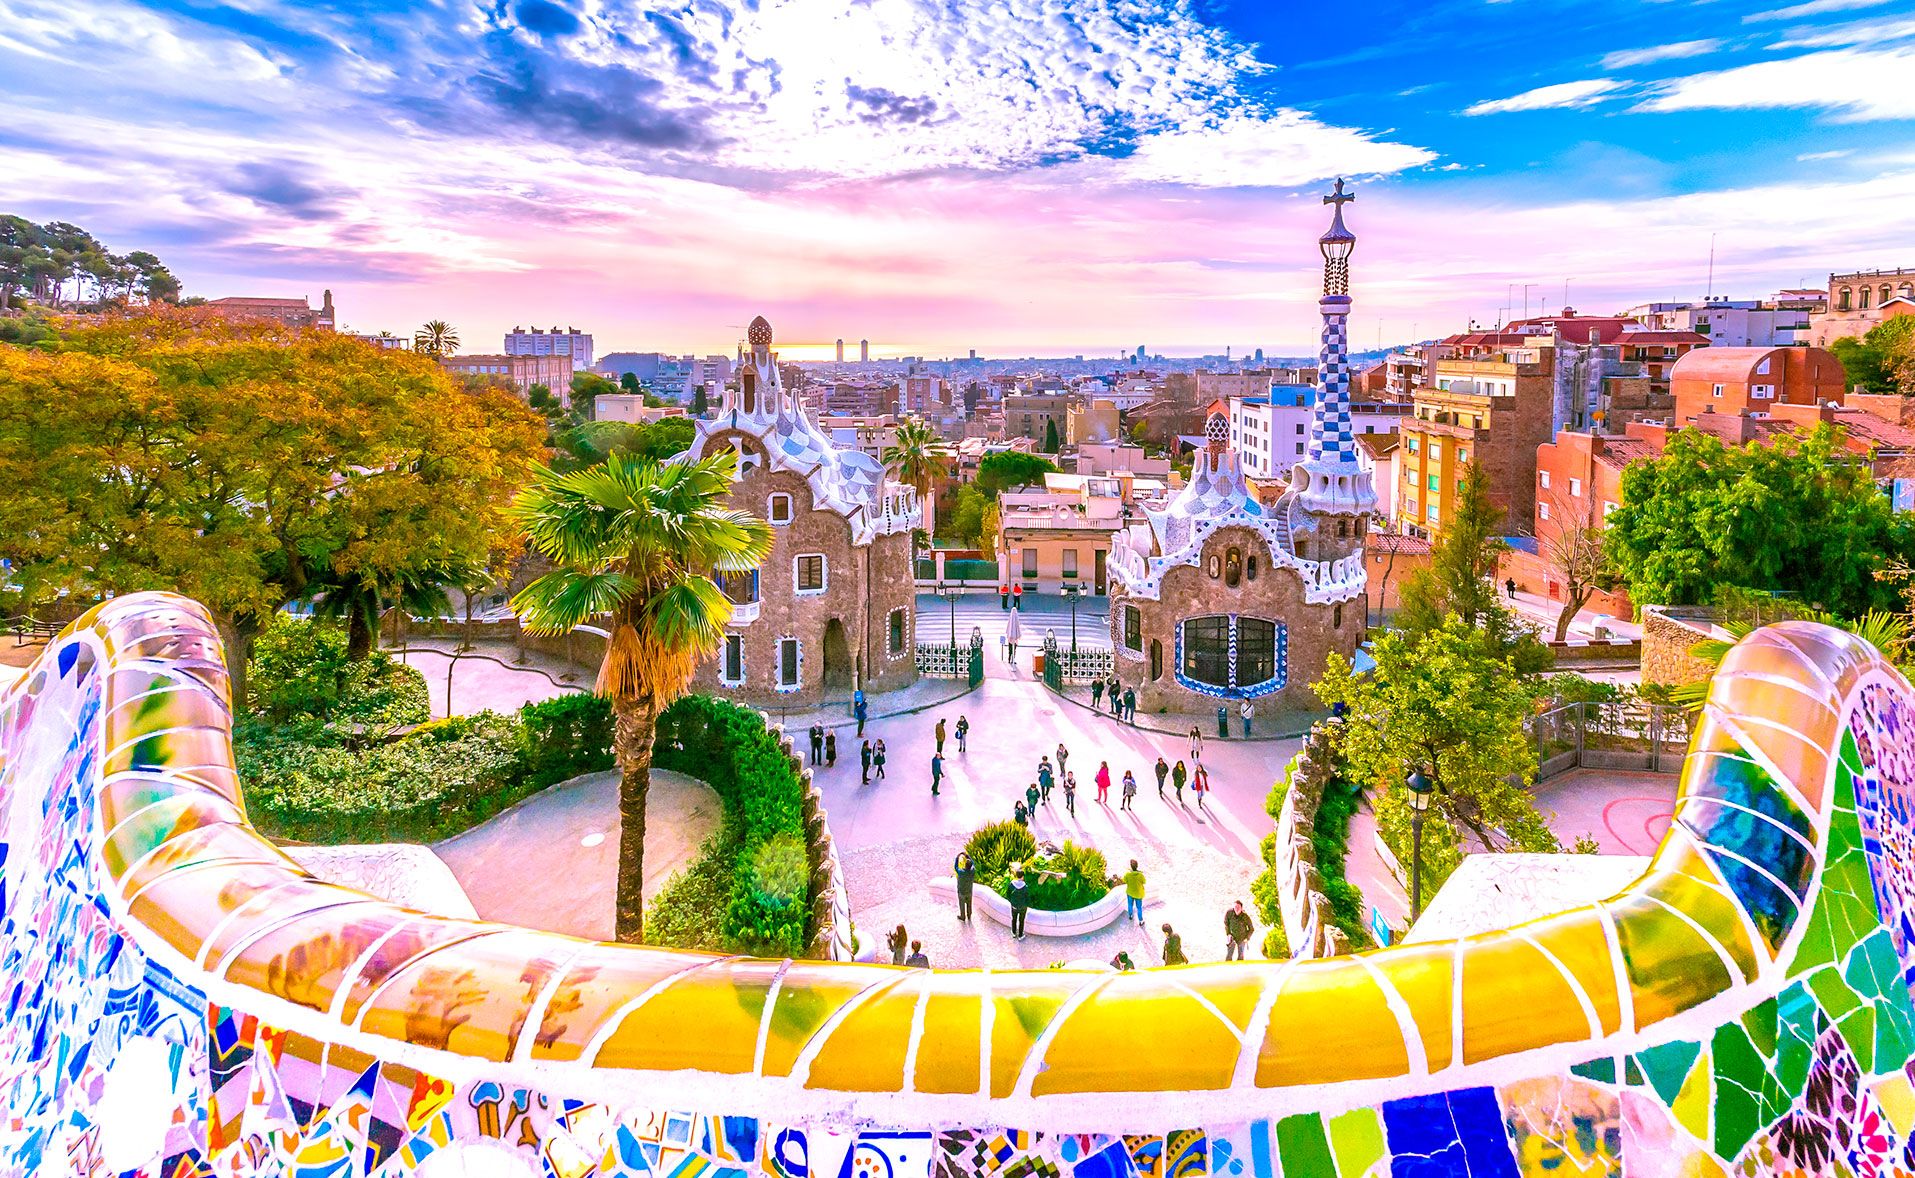 Parcguell.jpg